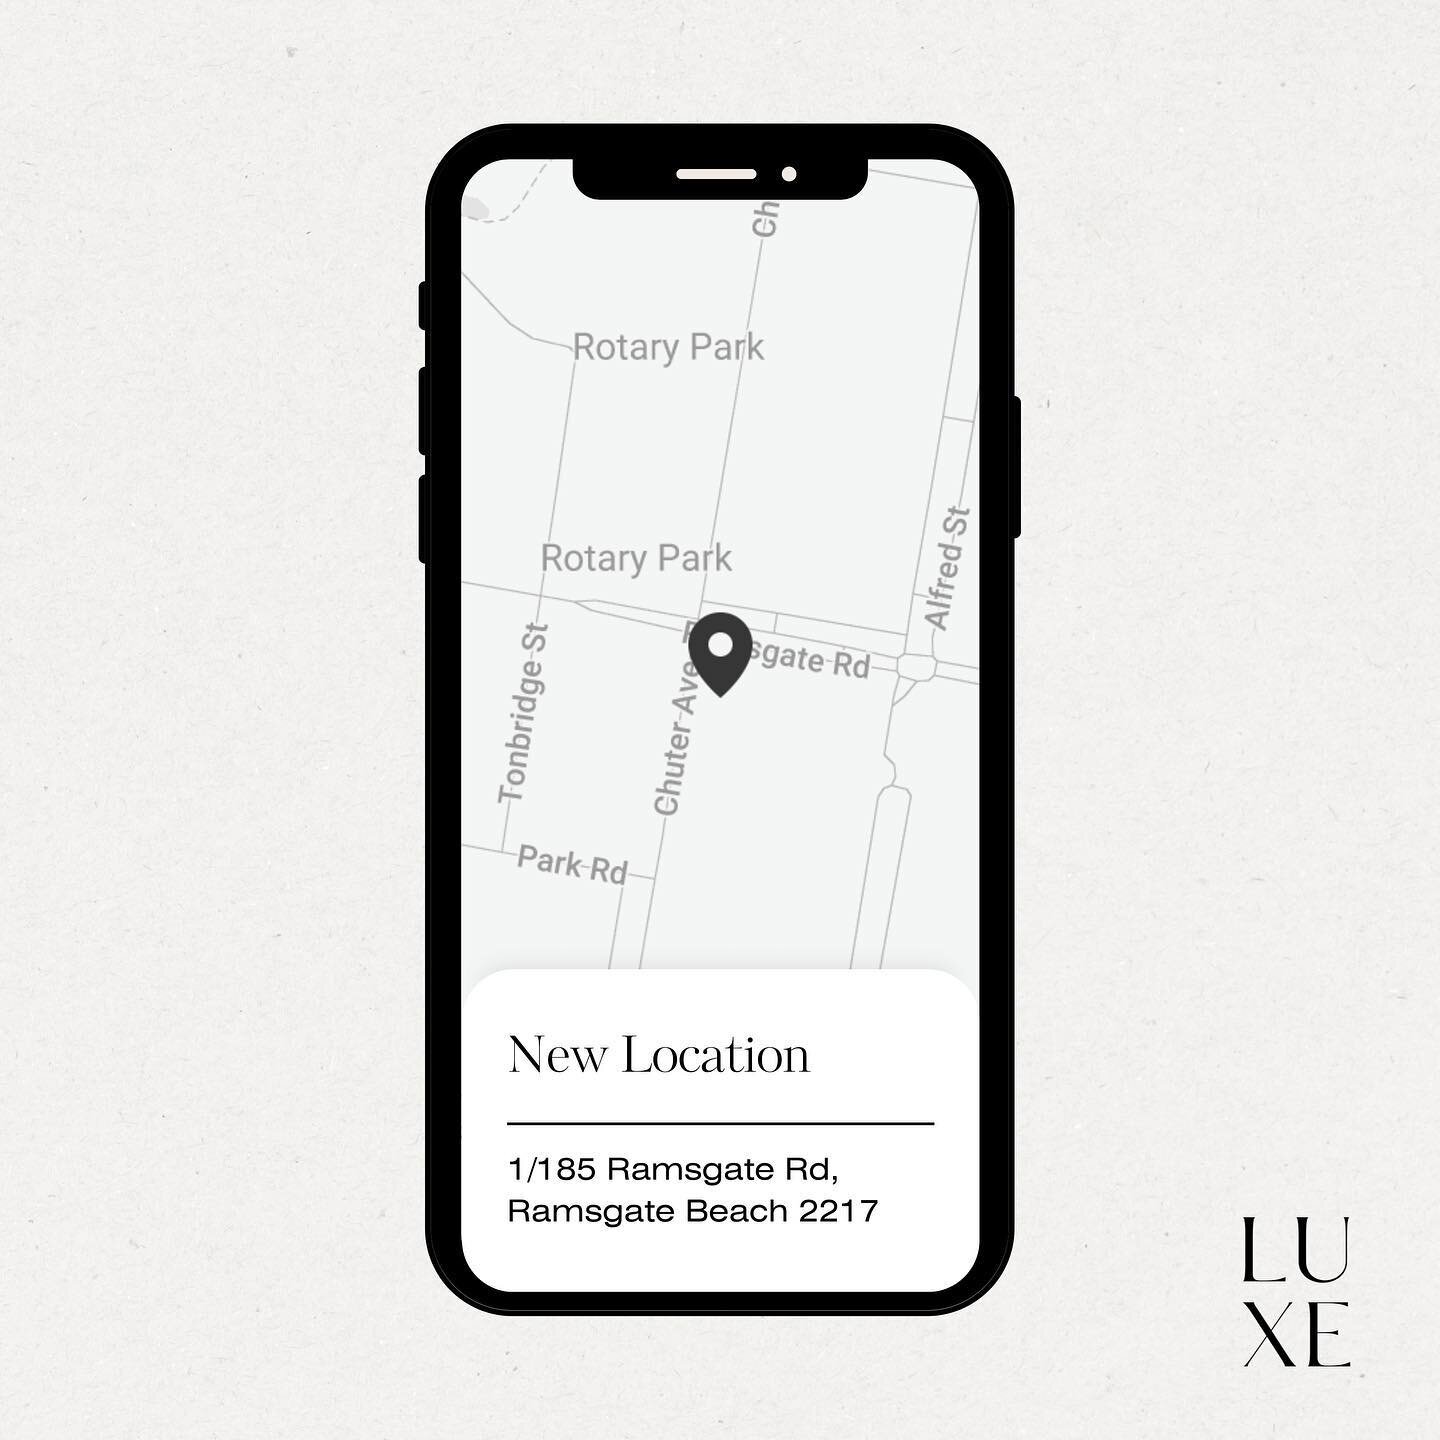 The Luxe Nurse will be located at Shop 1/185 Ramsgate Road, Ramsgate Beach 2217 from the 10th of July. 

With convenient parking located in front of the store, we are very excited to welcome you to our new luxe space.